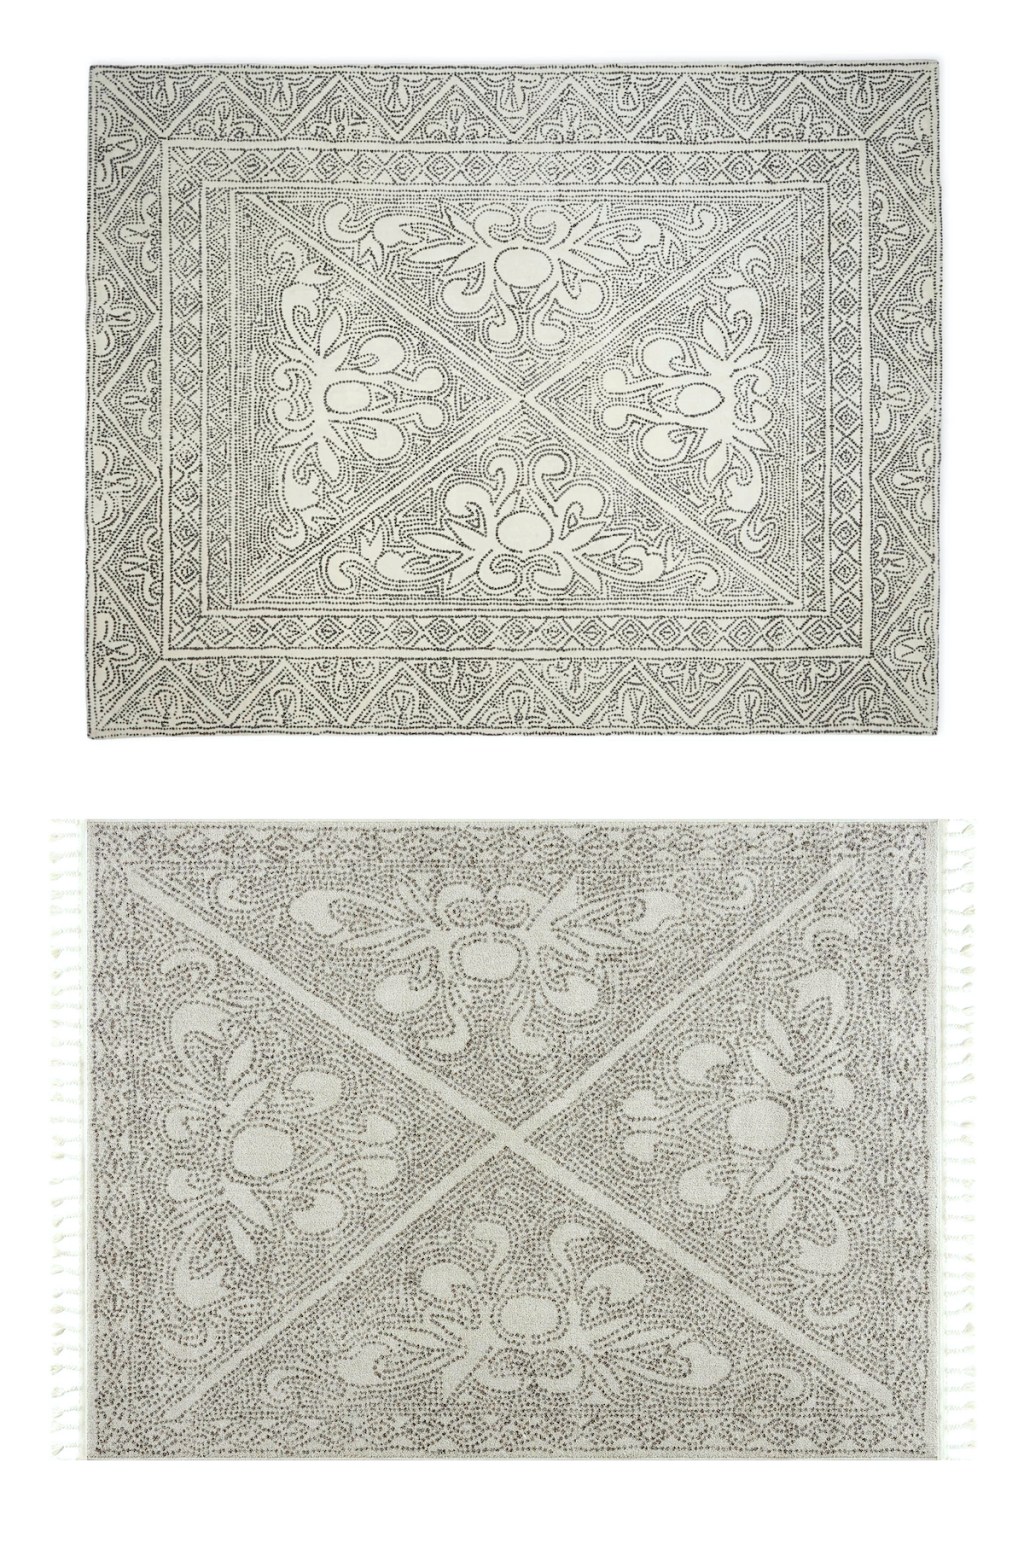 gray and cream patterned rug stock photos